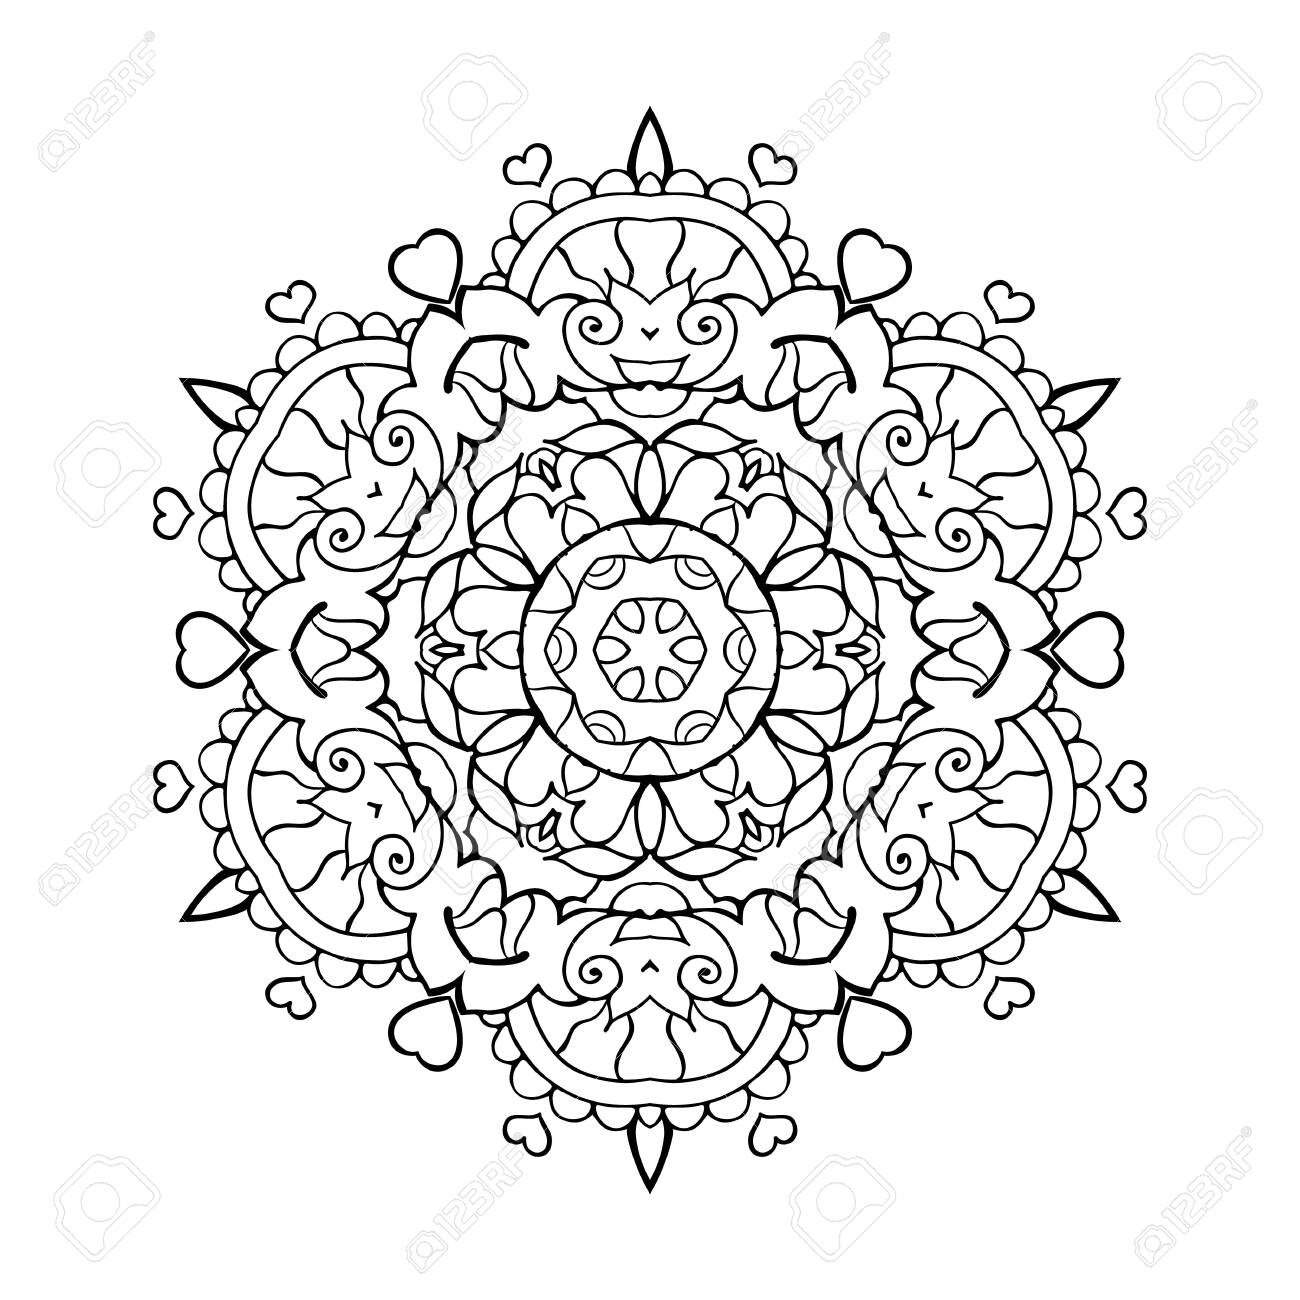 Mandala art for meditation color therapy adult coloring pages stress relief and relaxation valentine version with heart shape for valentines day gift royalty free svg cliparts vectors and stock illustration image